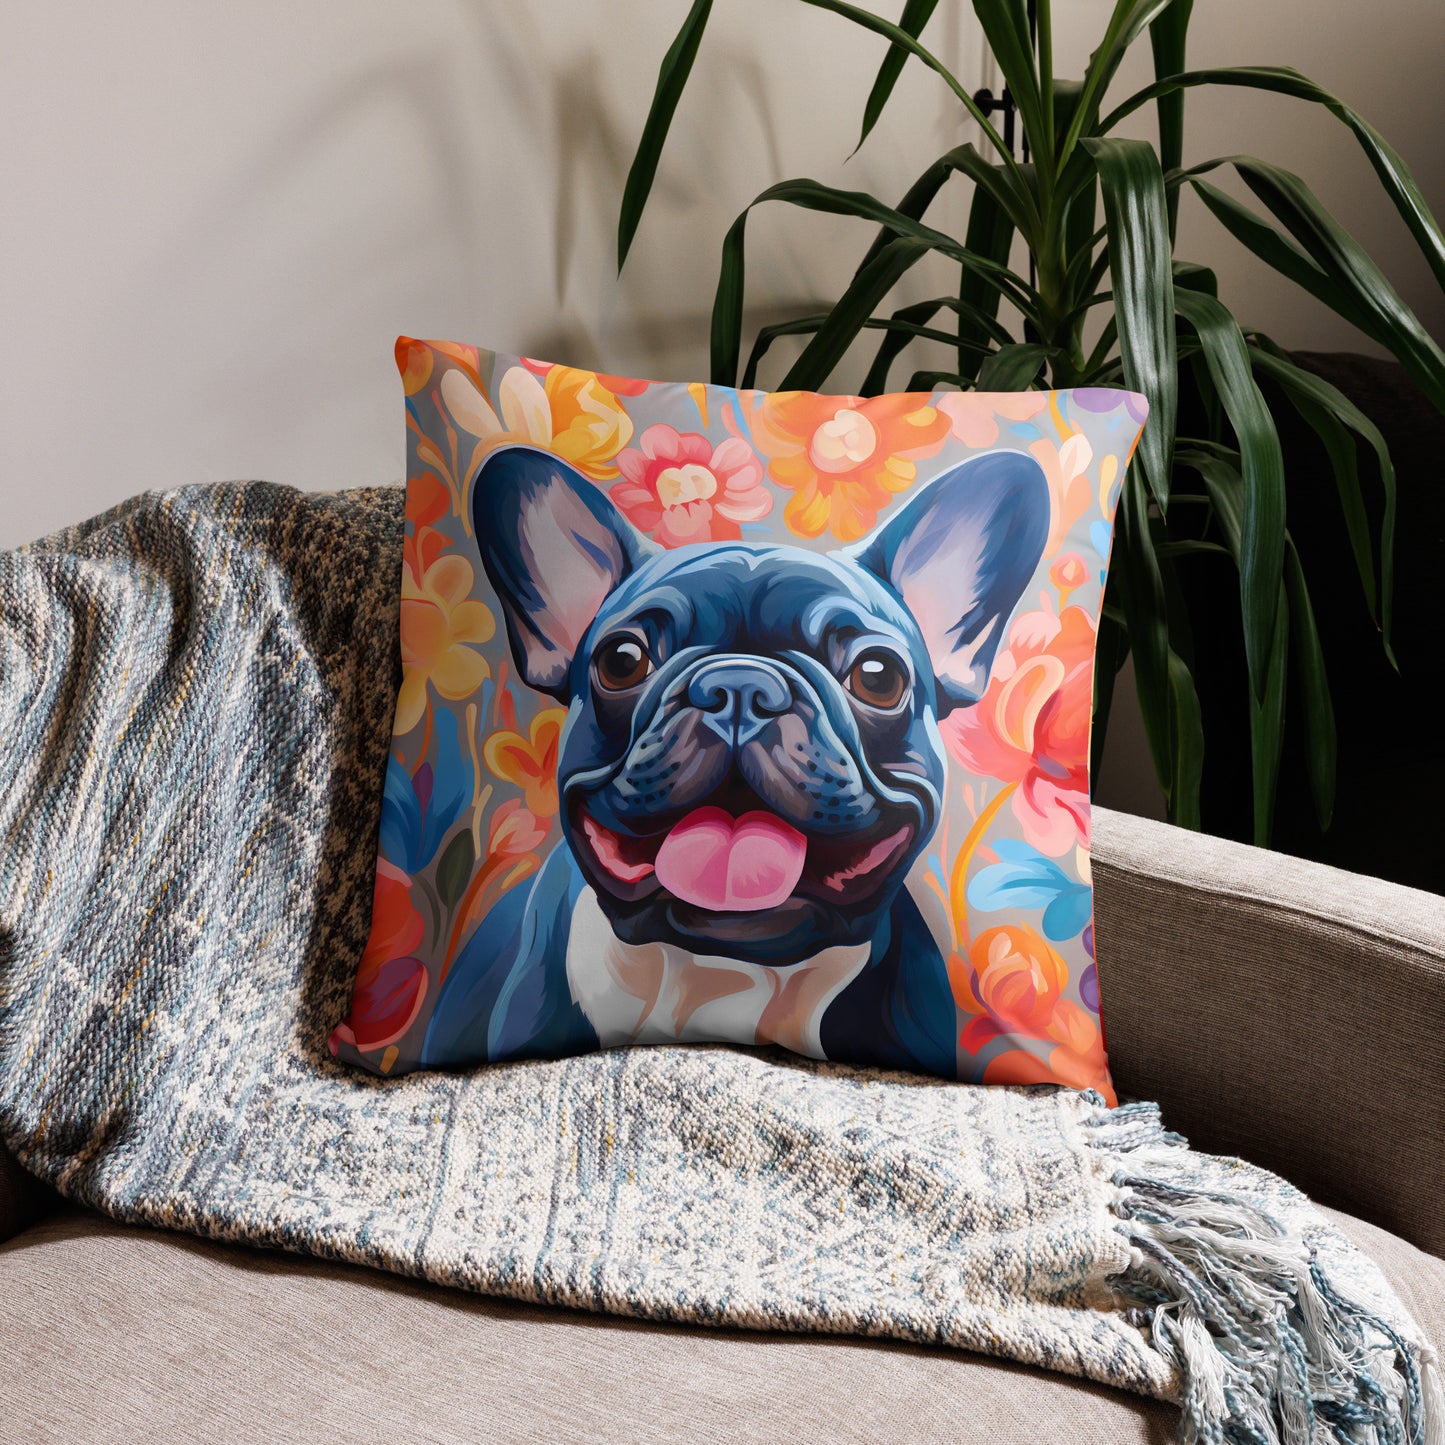 Flowers & Frenchies Pillow